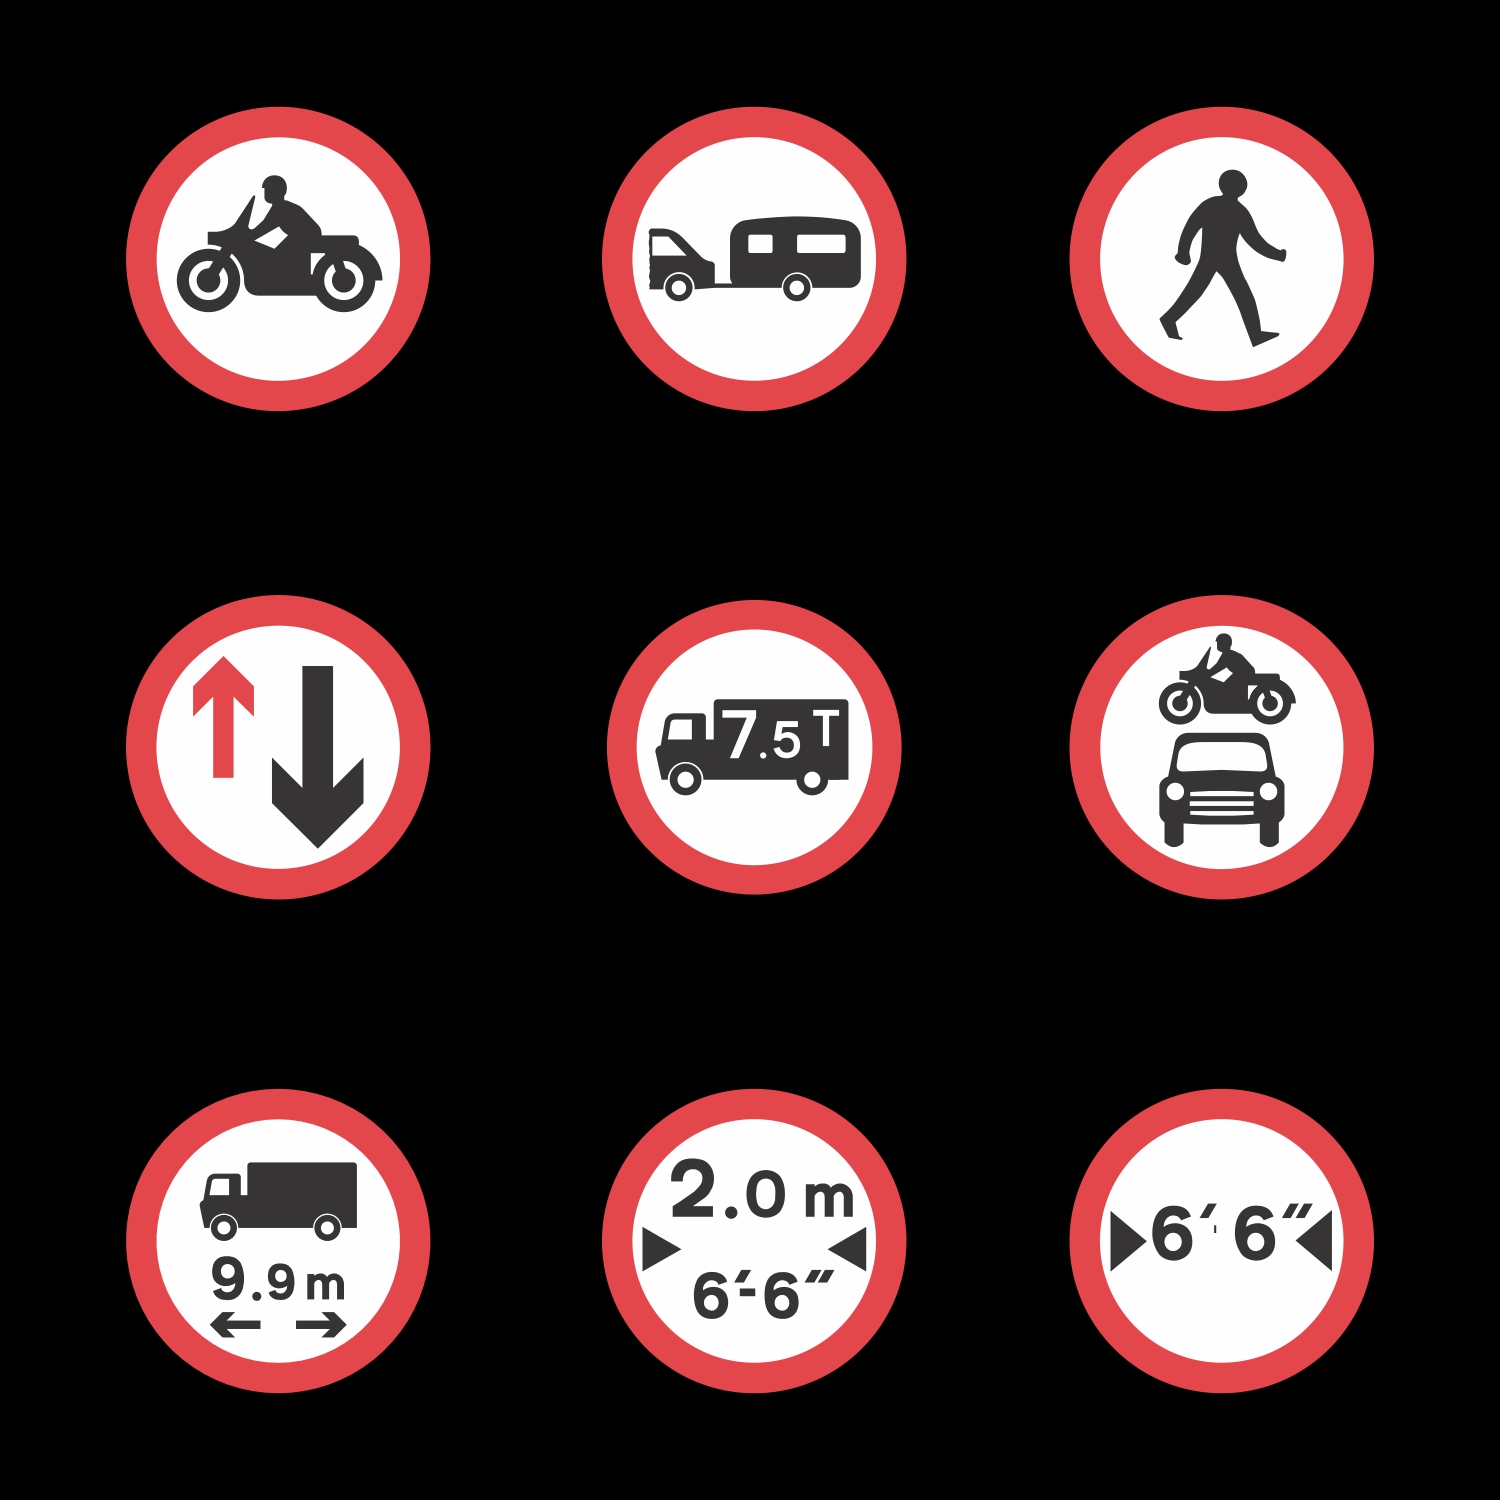 Free vector A vector collection of circular road traffic signs CDR file download for free